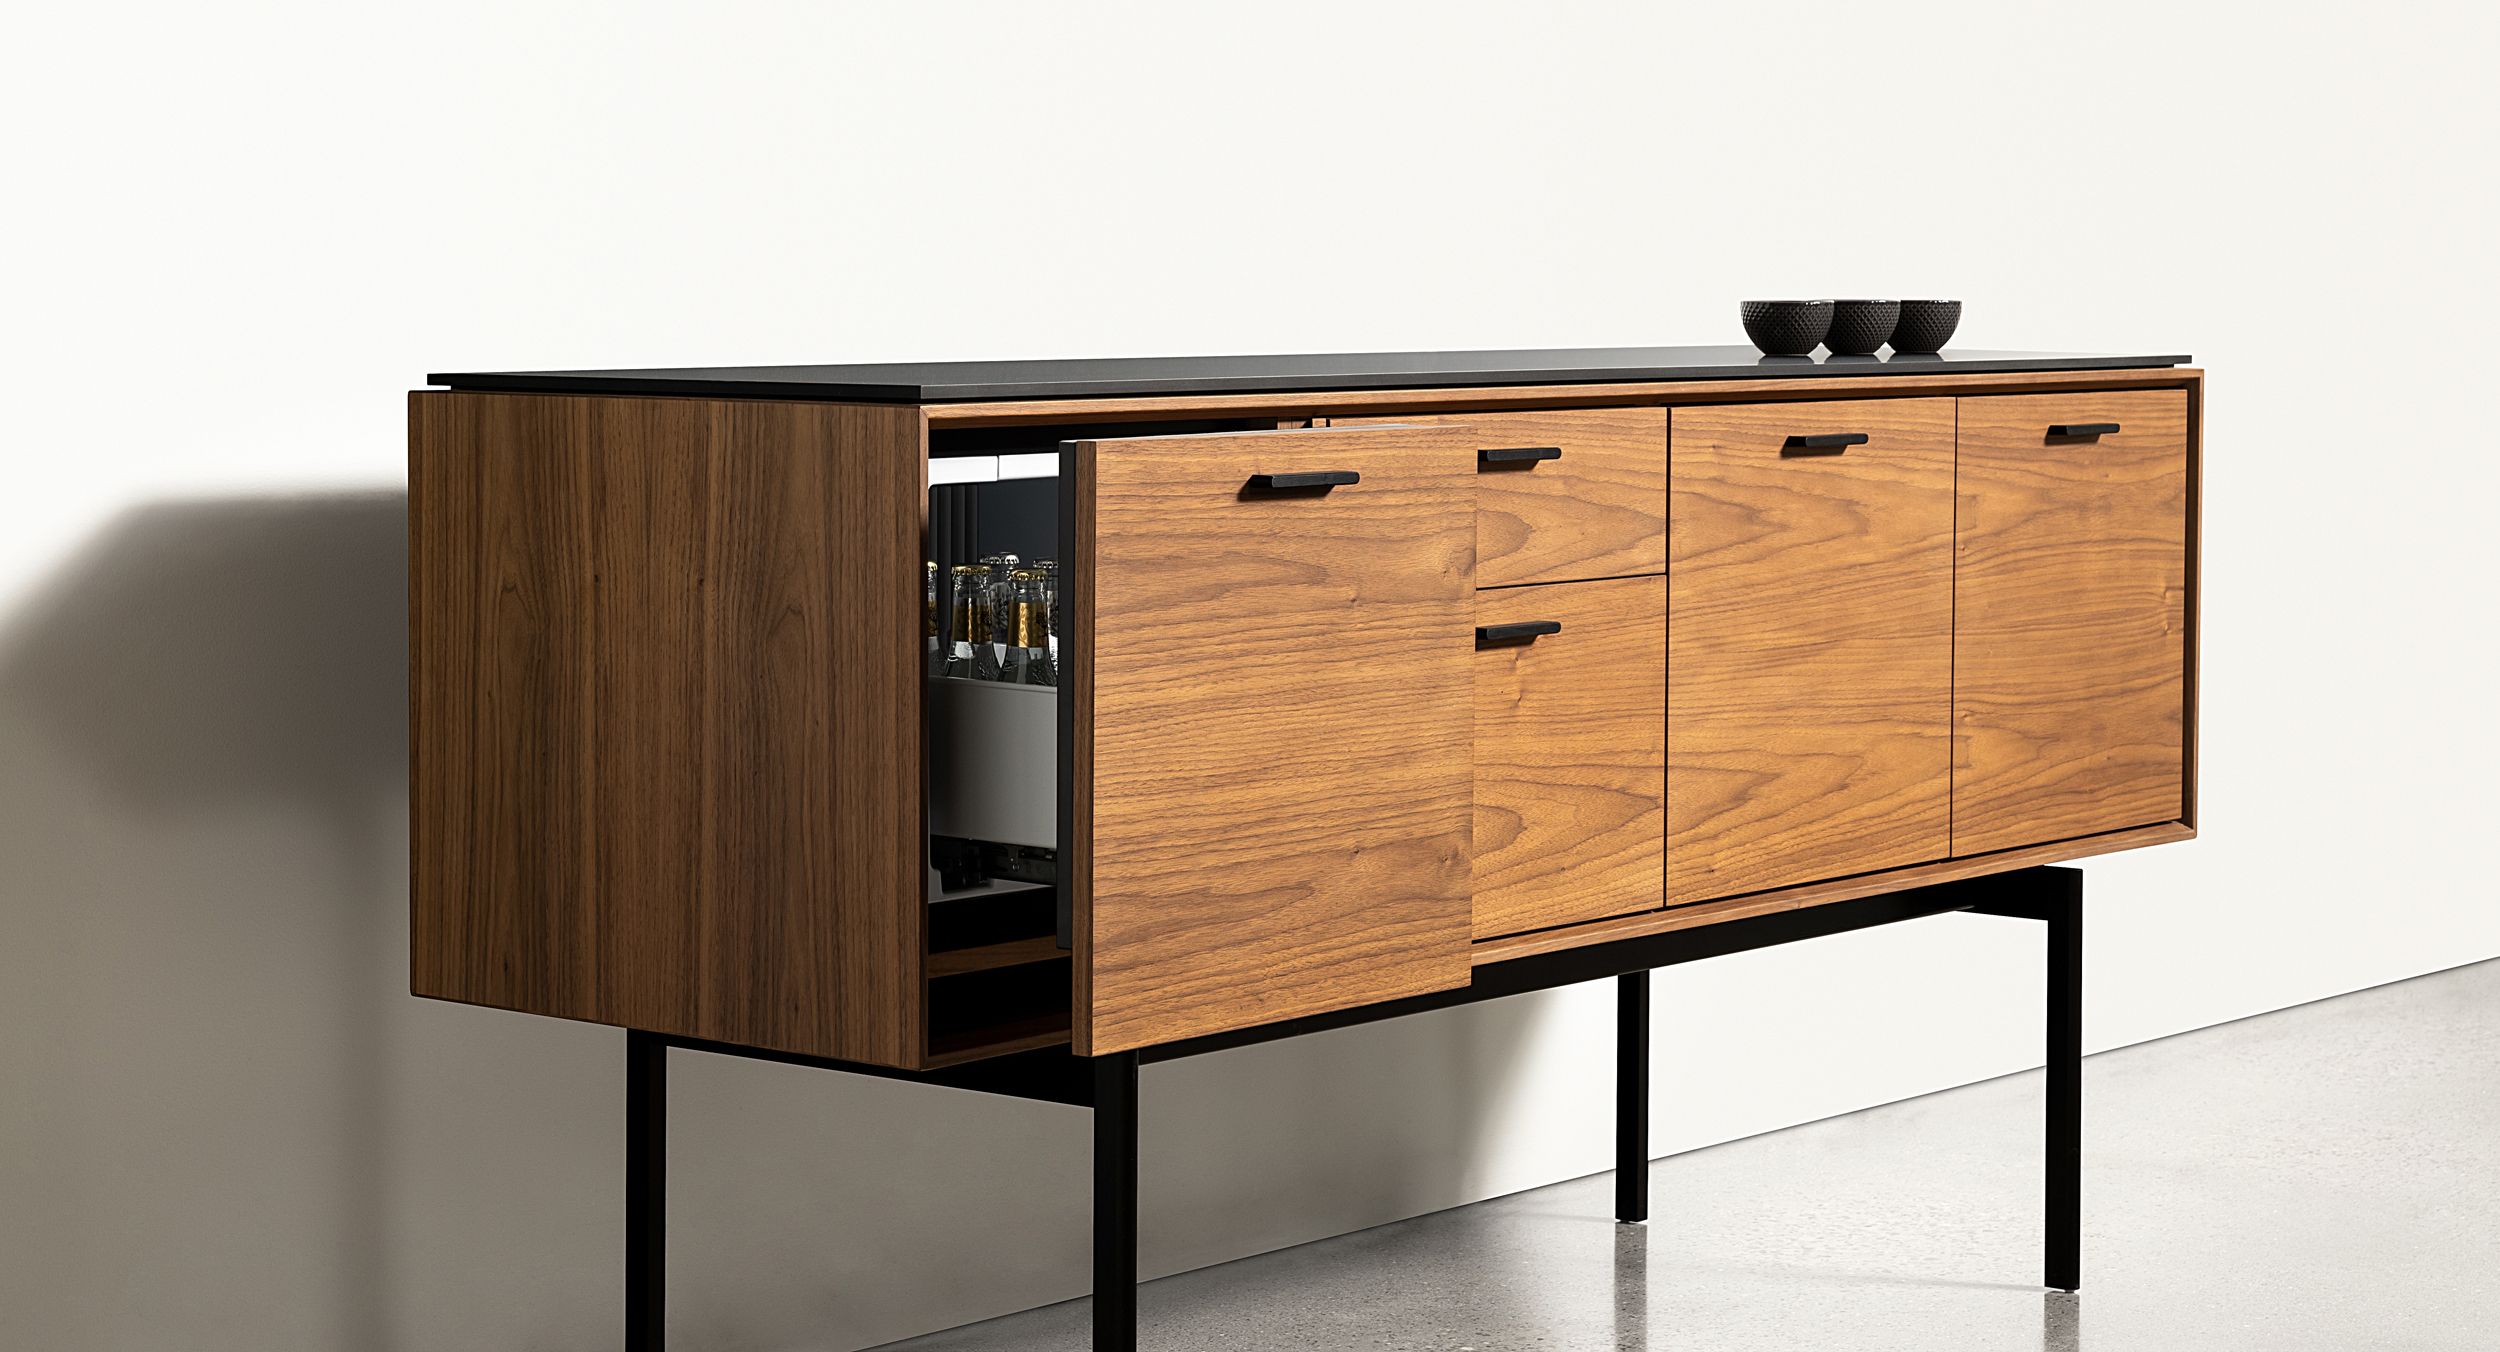 Halo credenza's modular design can be tailored to meet every taste and functional requirement.